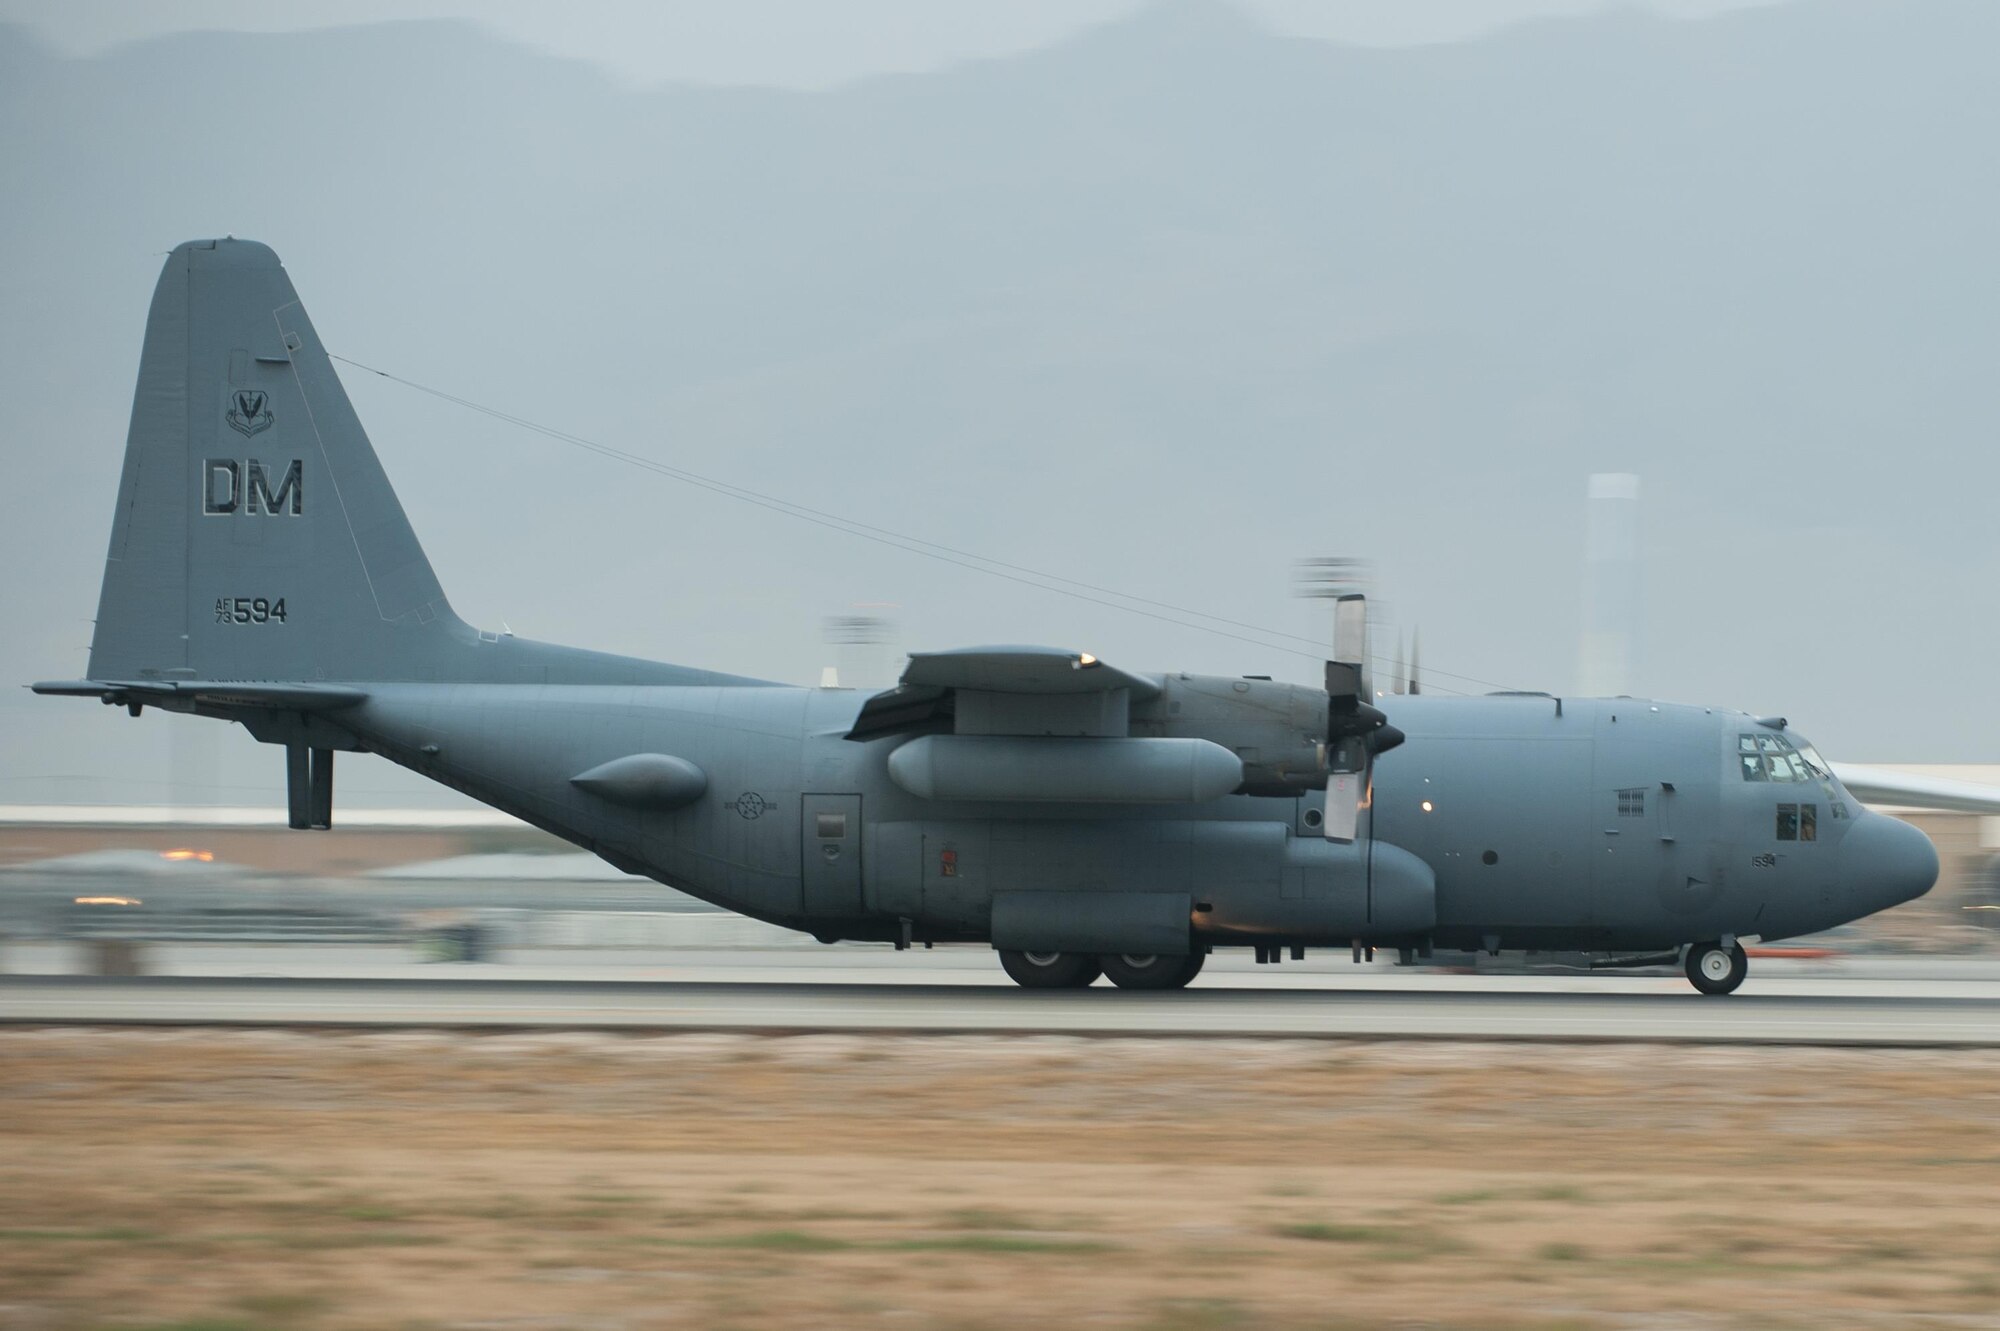 A U.S. EC-130H Compass Call aircraft assigned to the 41st Expeditionary Electronic Combat Squadron lands at Bagram Airfield, Afghanistan, Sept. 22, 2015. The Compass Call is an airborne tactical weapon system using a heavily modified version of the C-130 Hercules airframe. (U.S. Air Force photo by Tech. Sgt. Joseph Swafford/Released)